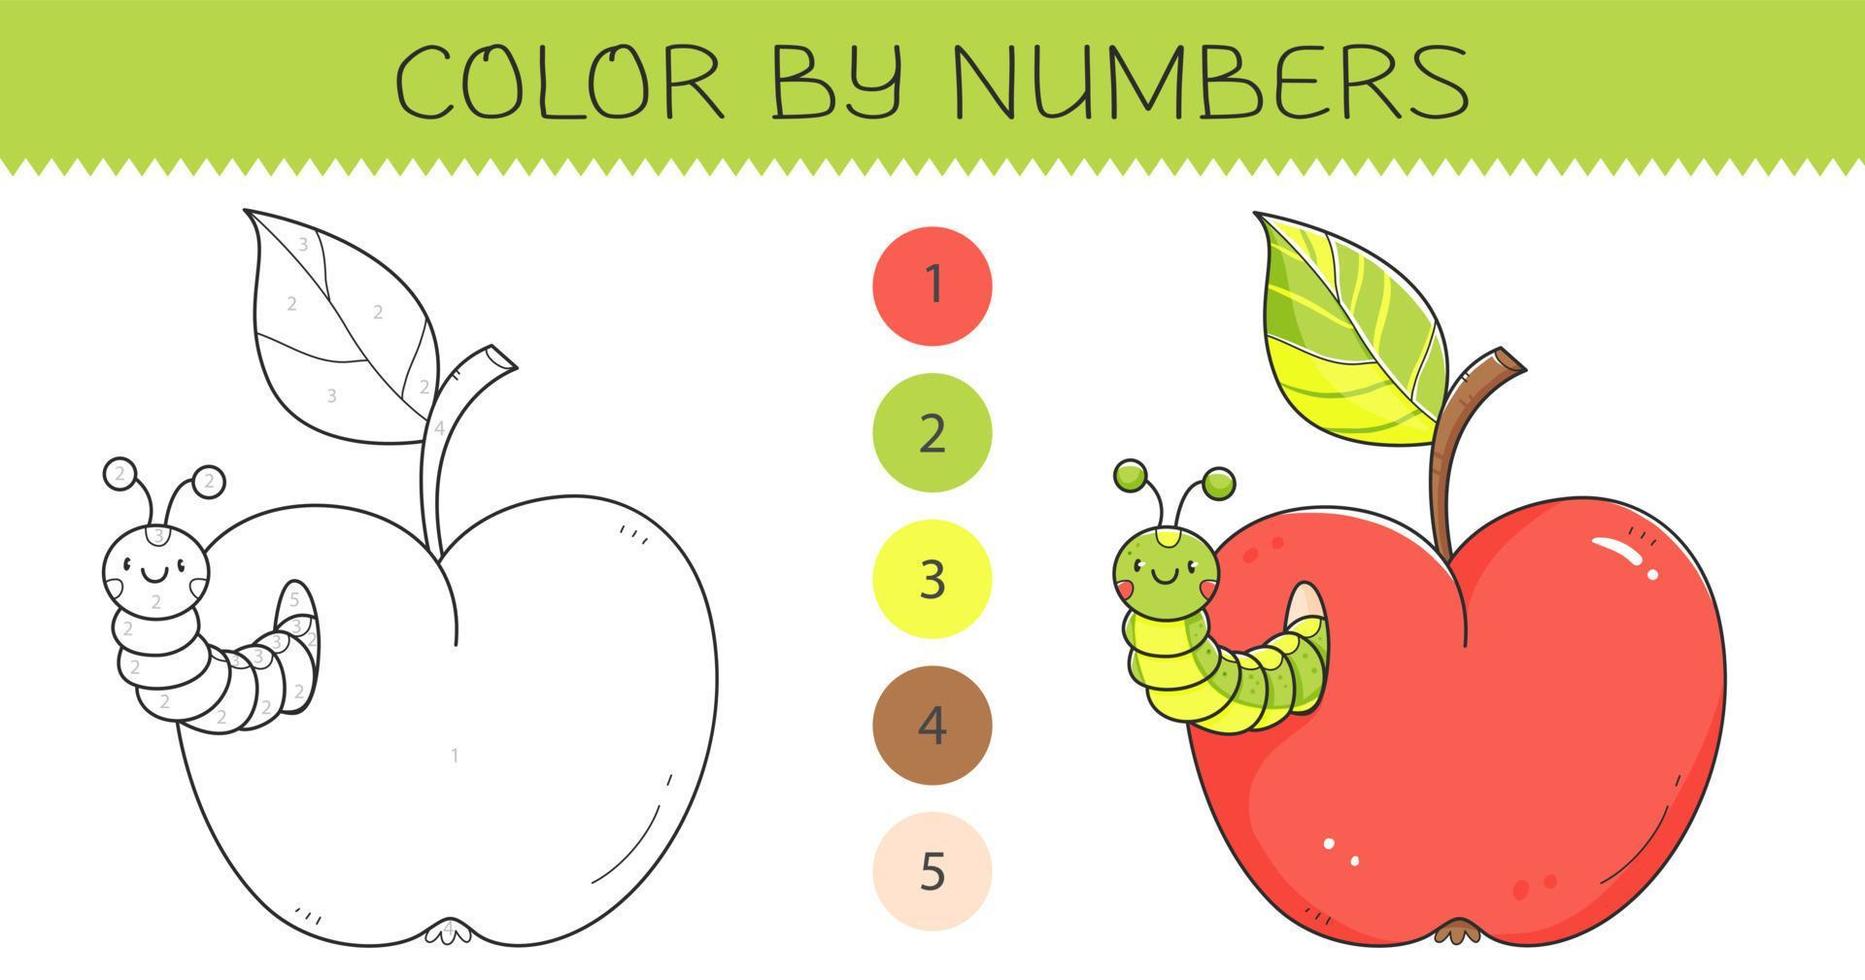 Color by numbers coloring book for kids with an apple and caterpillar. Coloring page with cute cartoon apple and worm with an example for coloring. Monochrome and color versions. Vector illustration.